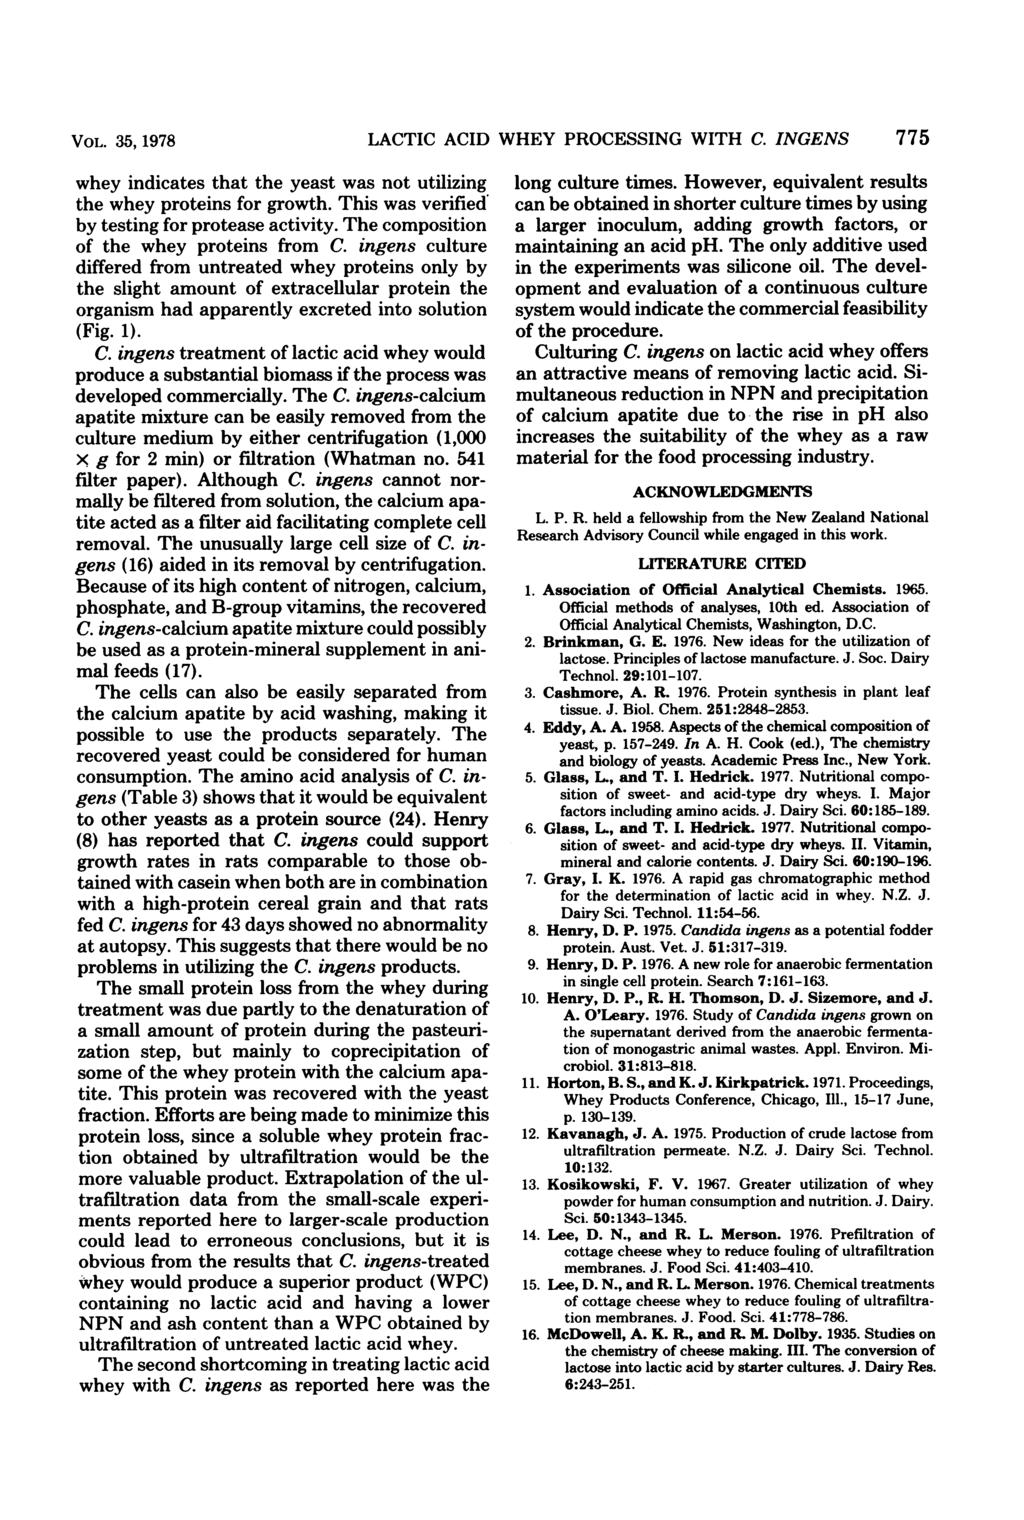 VOL. 35, 1978 whey indicates that the yeast was not utilizing the whey proteins for growth. This was verified' by testing for protease activity. The composition of the whey proteins from C.